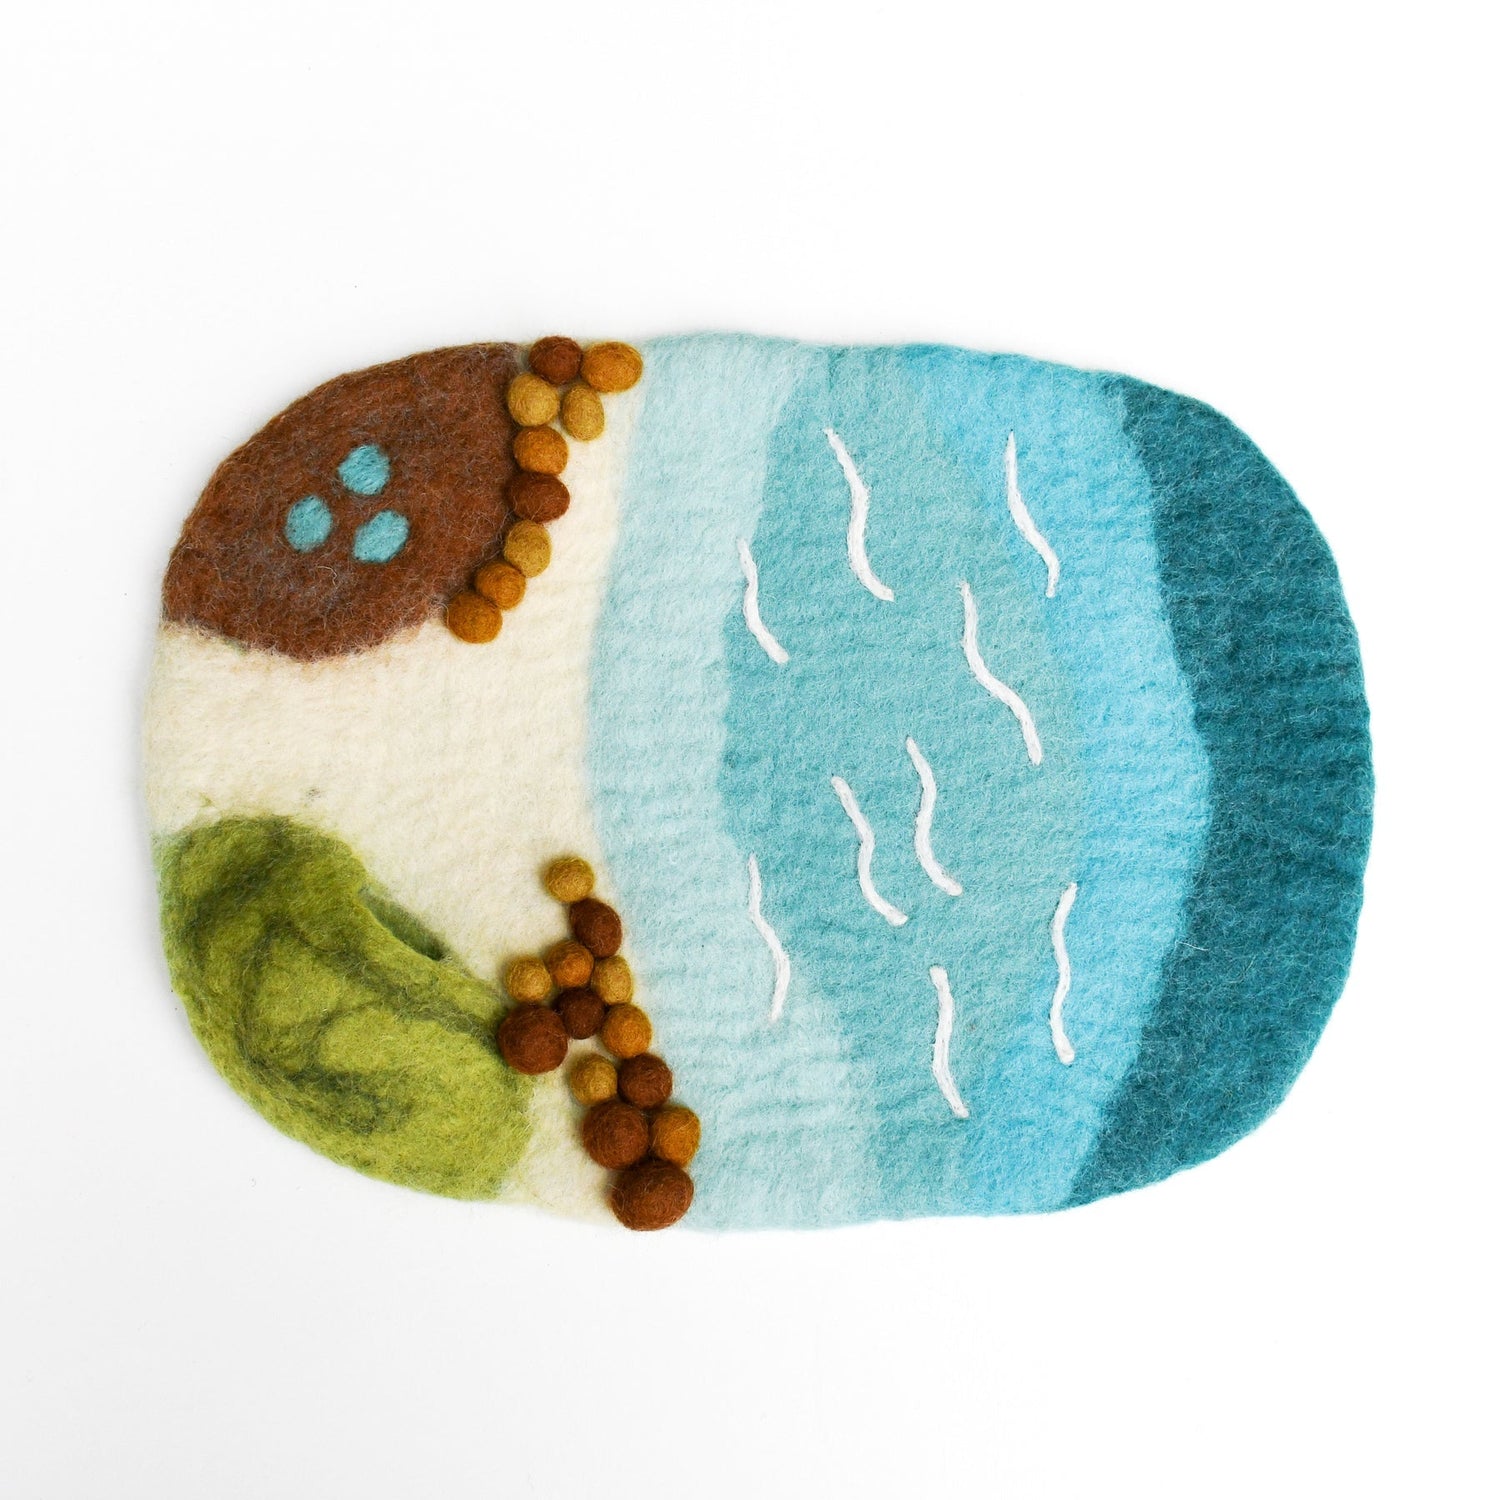 SEA, BEACH AND ROCKPOOL PLAY MAT PLAYSCAPE by TARA TREASURES - The Playful Collective